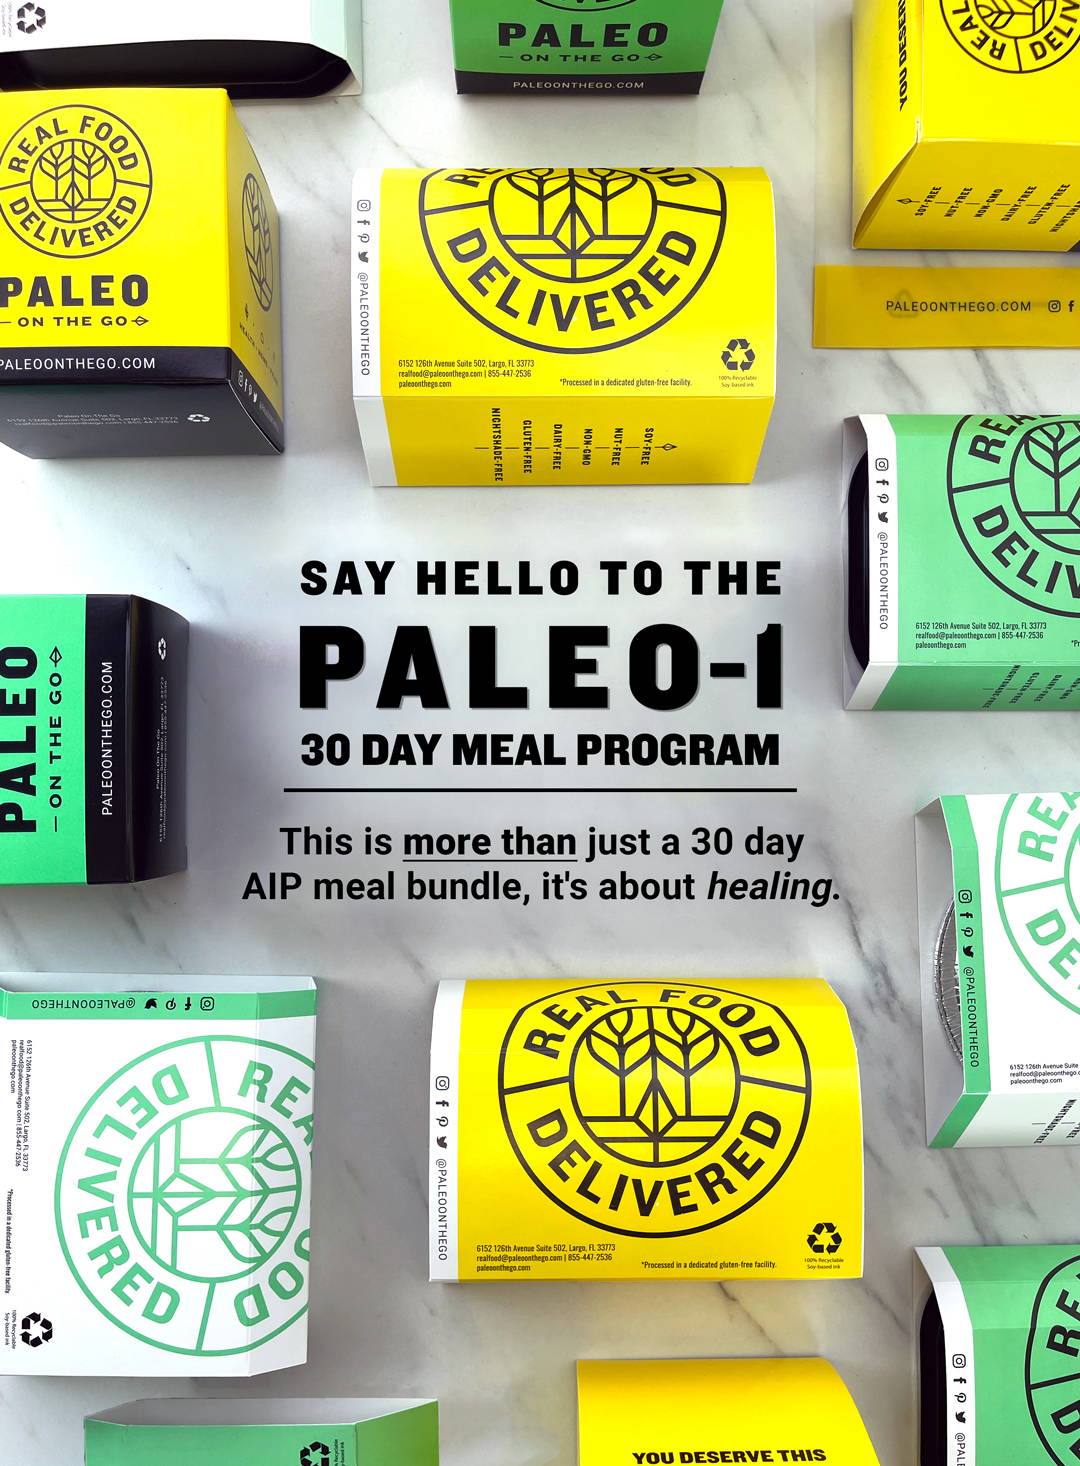 Paleo-1 30 Day Meal Program More Than Just a 30 Day AIP Meal Bundle. 30 days to  revive and thrive!